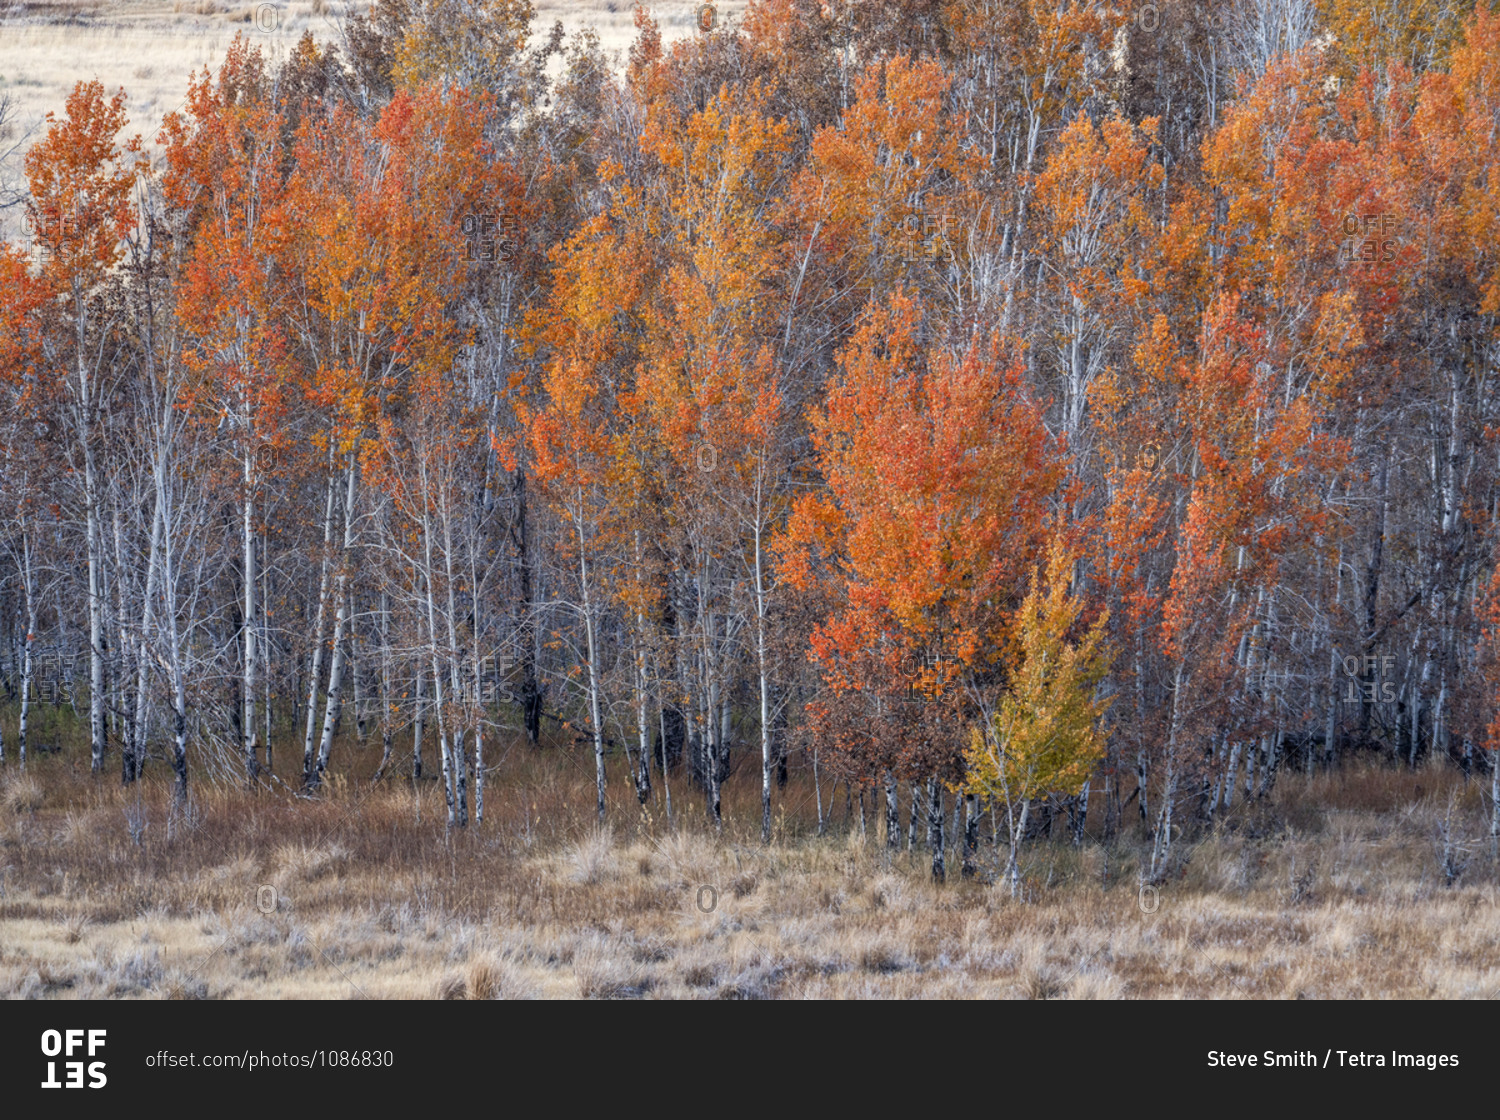 USA, Idaho, Sun Valley, Colorful trees in forest in autumn